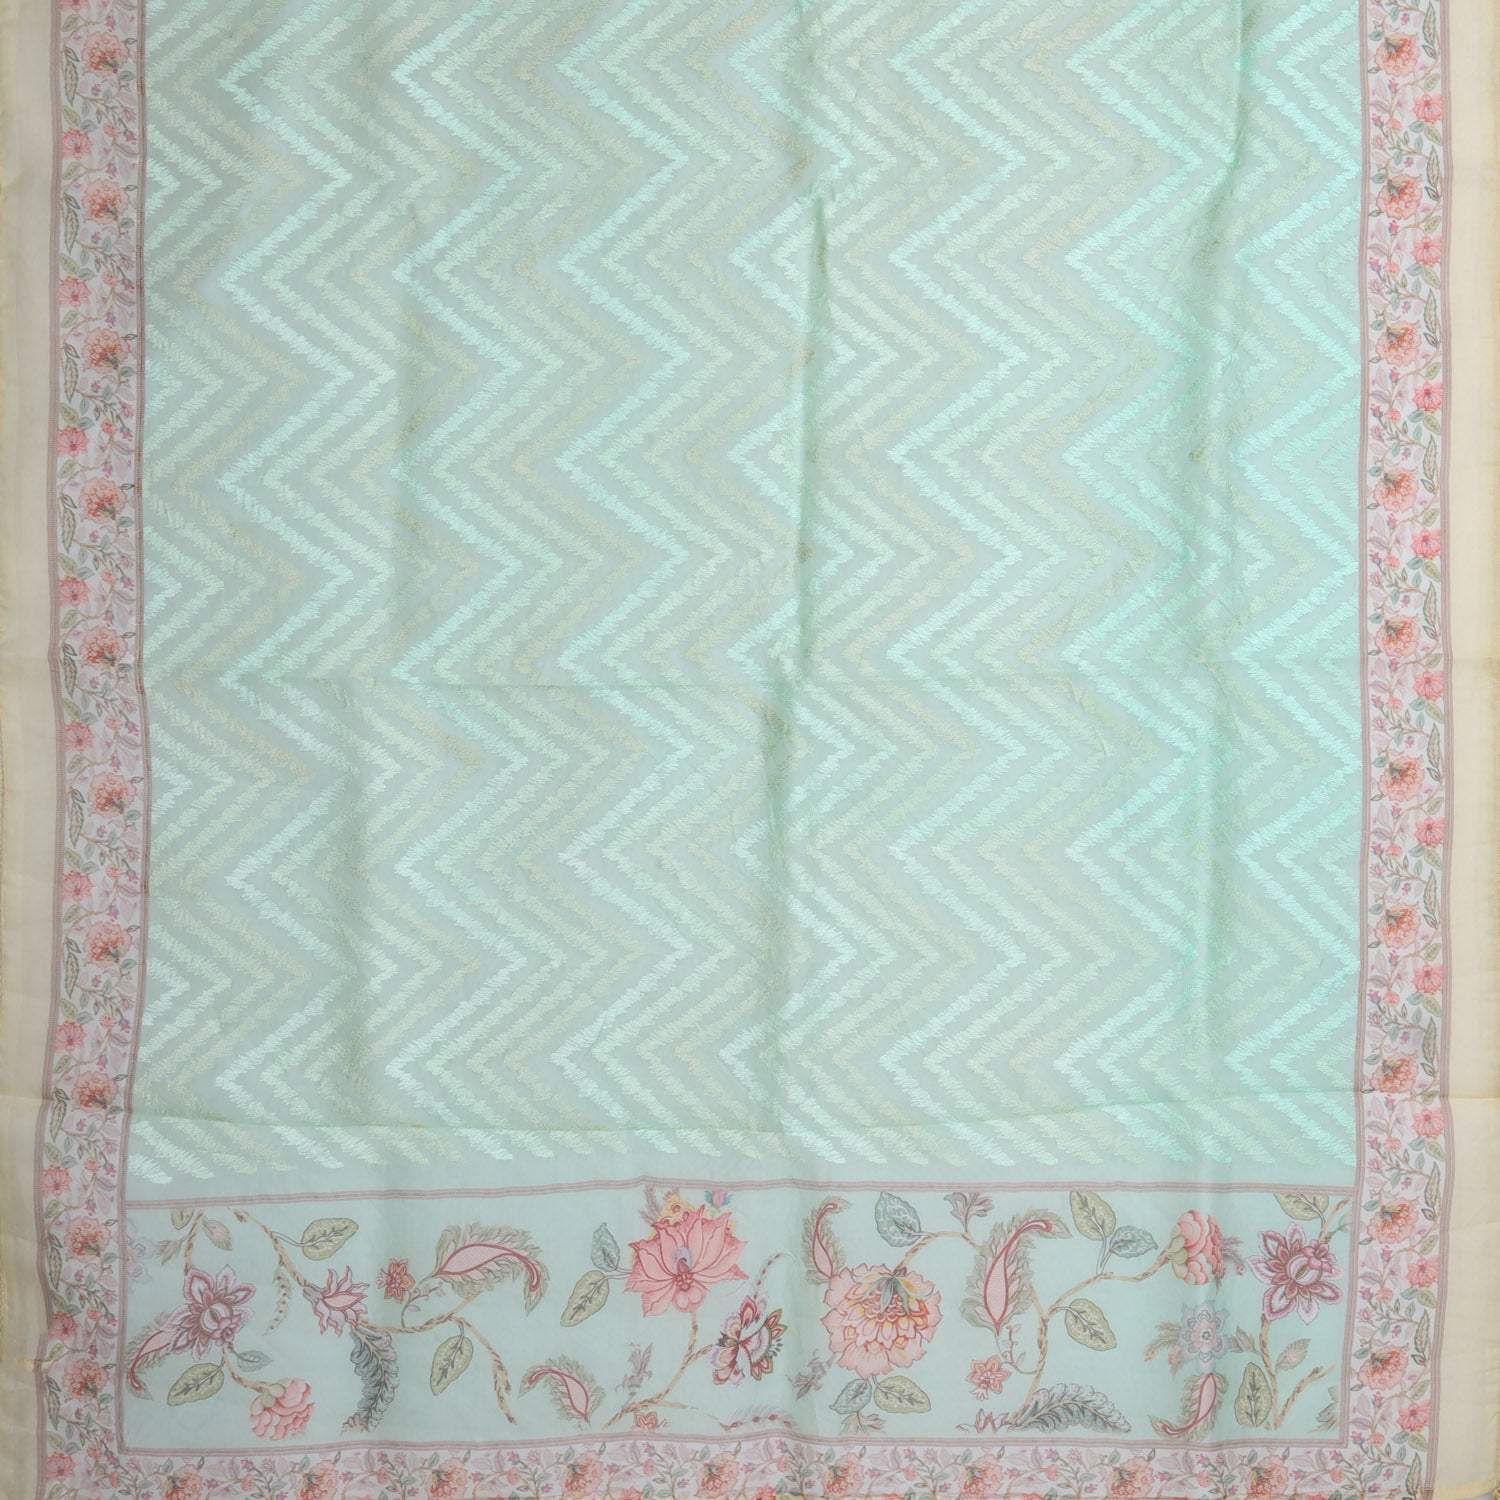 Seafoam Blue Printed Organza Saree With Chevron Pattern Embroidery - Singhania's